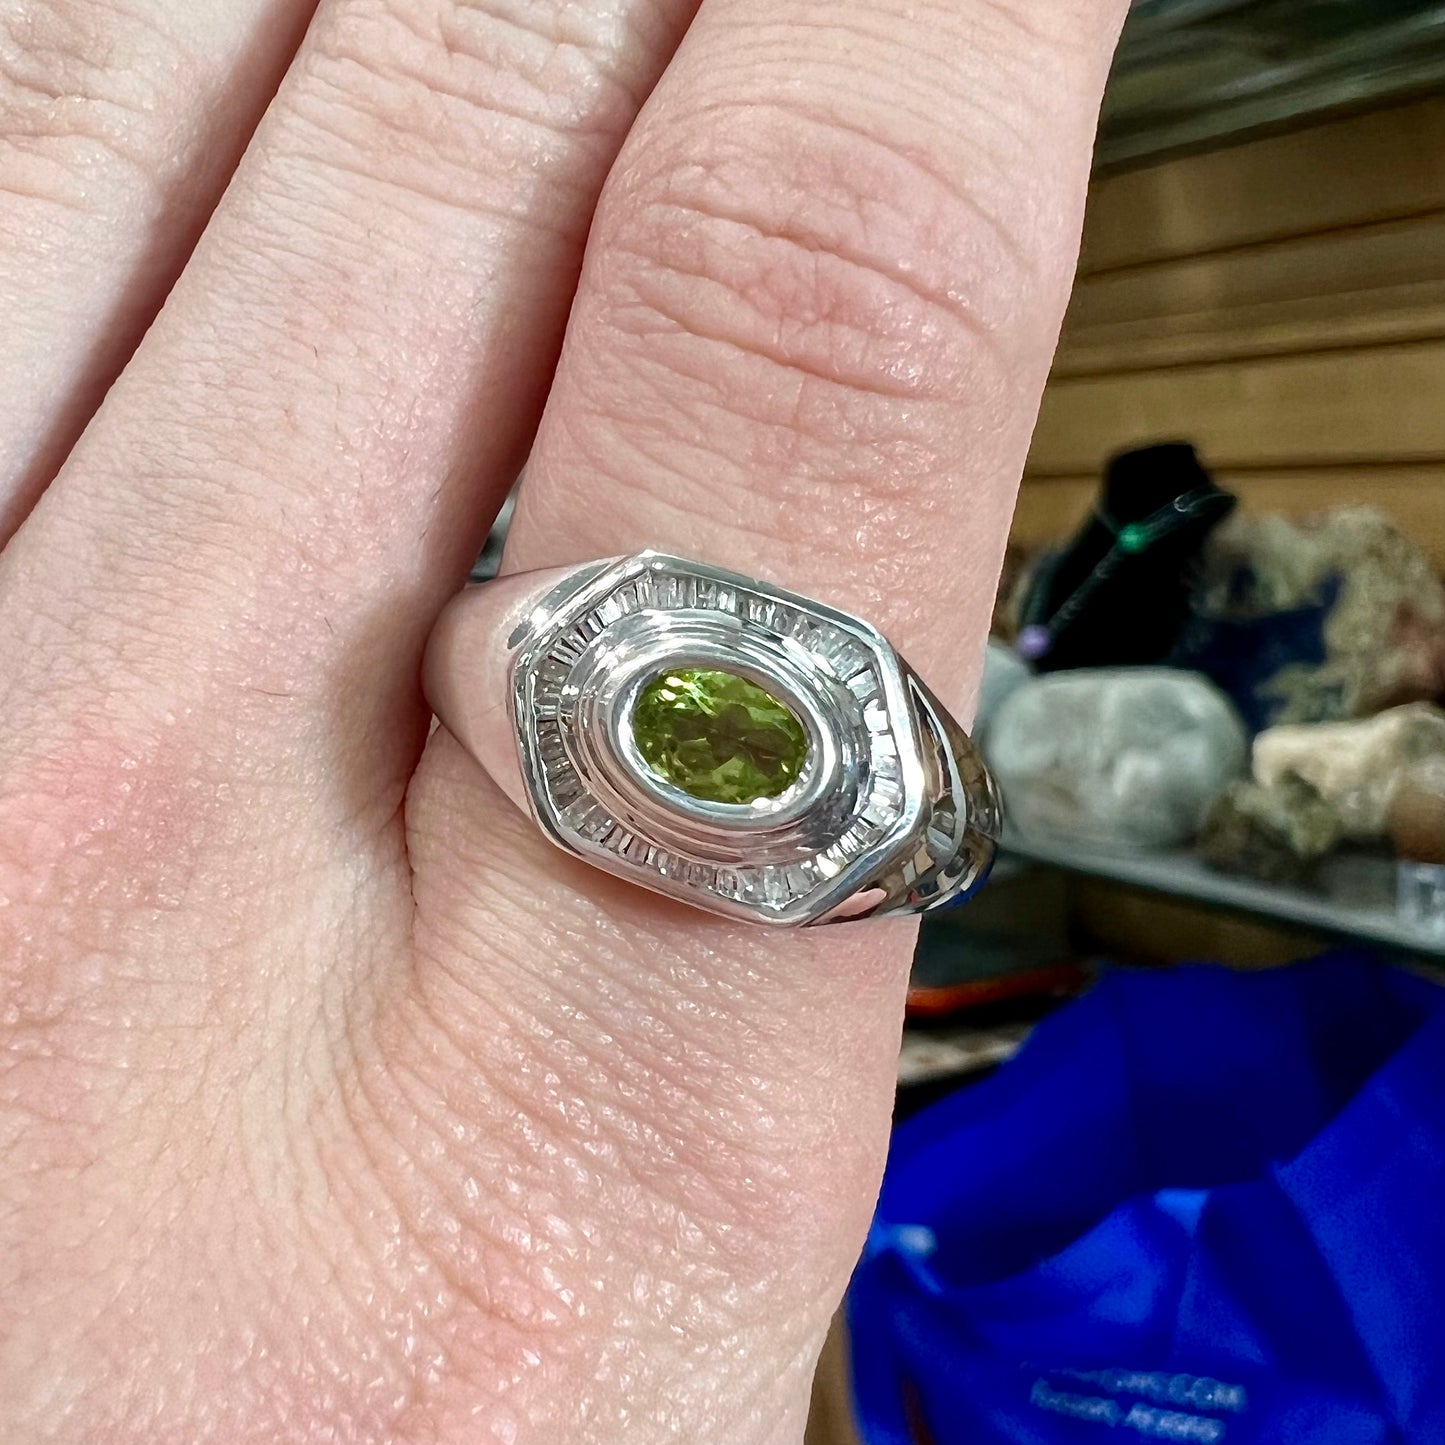 A sterling silver men's ring set with green peridot surrounded by baguette cut diamonds.